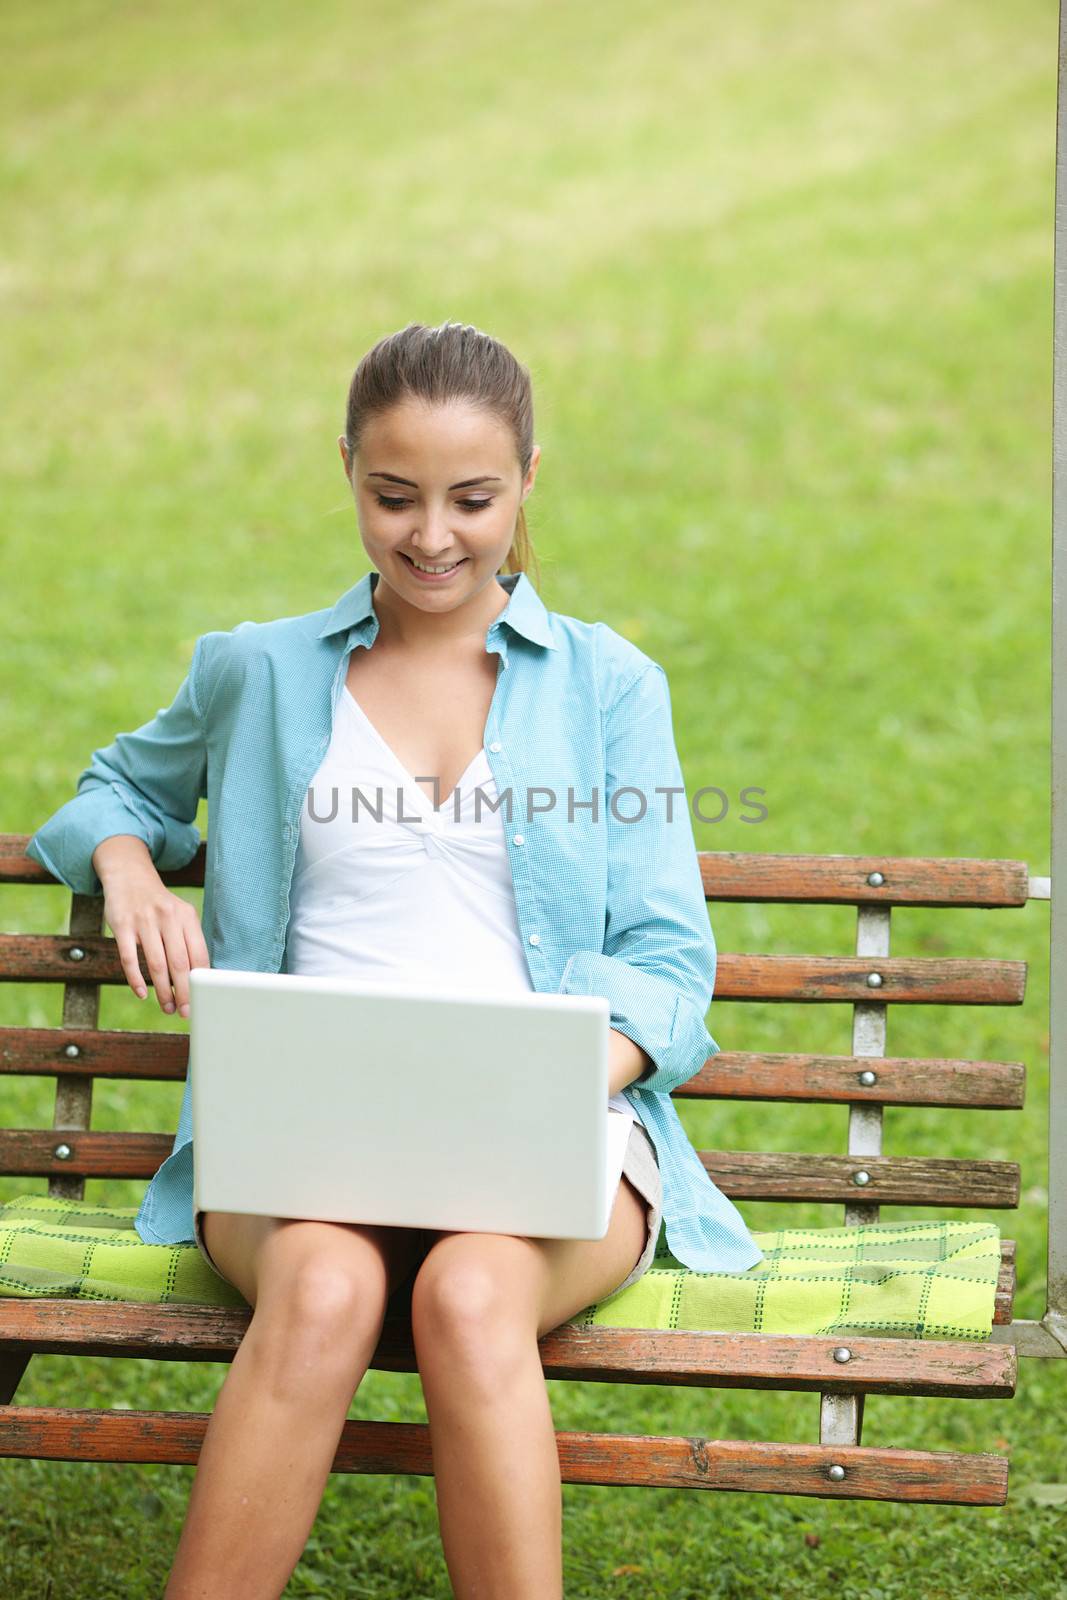 Cheerful girl working in laptop outdoors in a sunny day